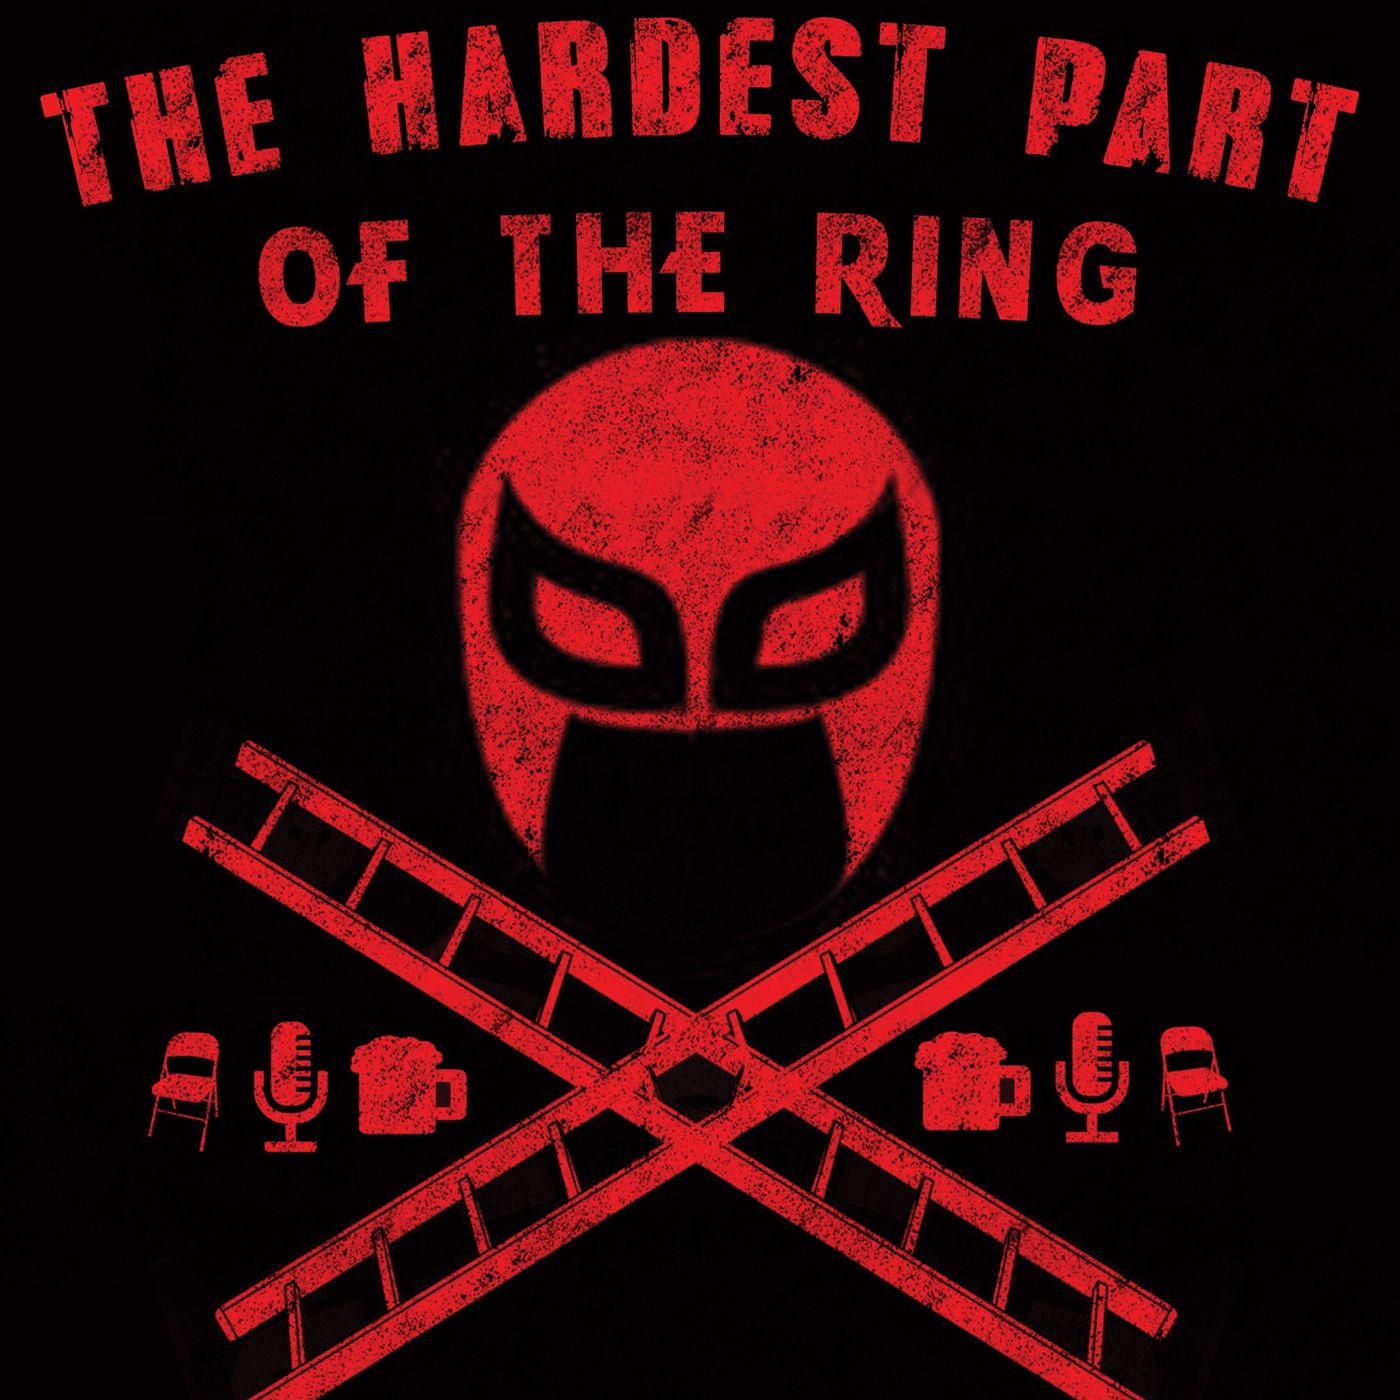 The Hardest Part of the Ring Ep. 1